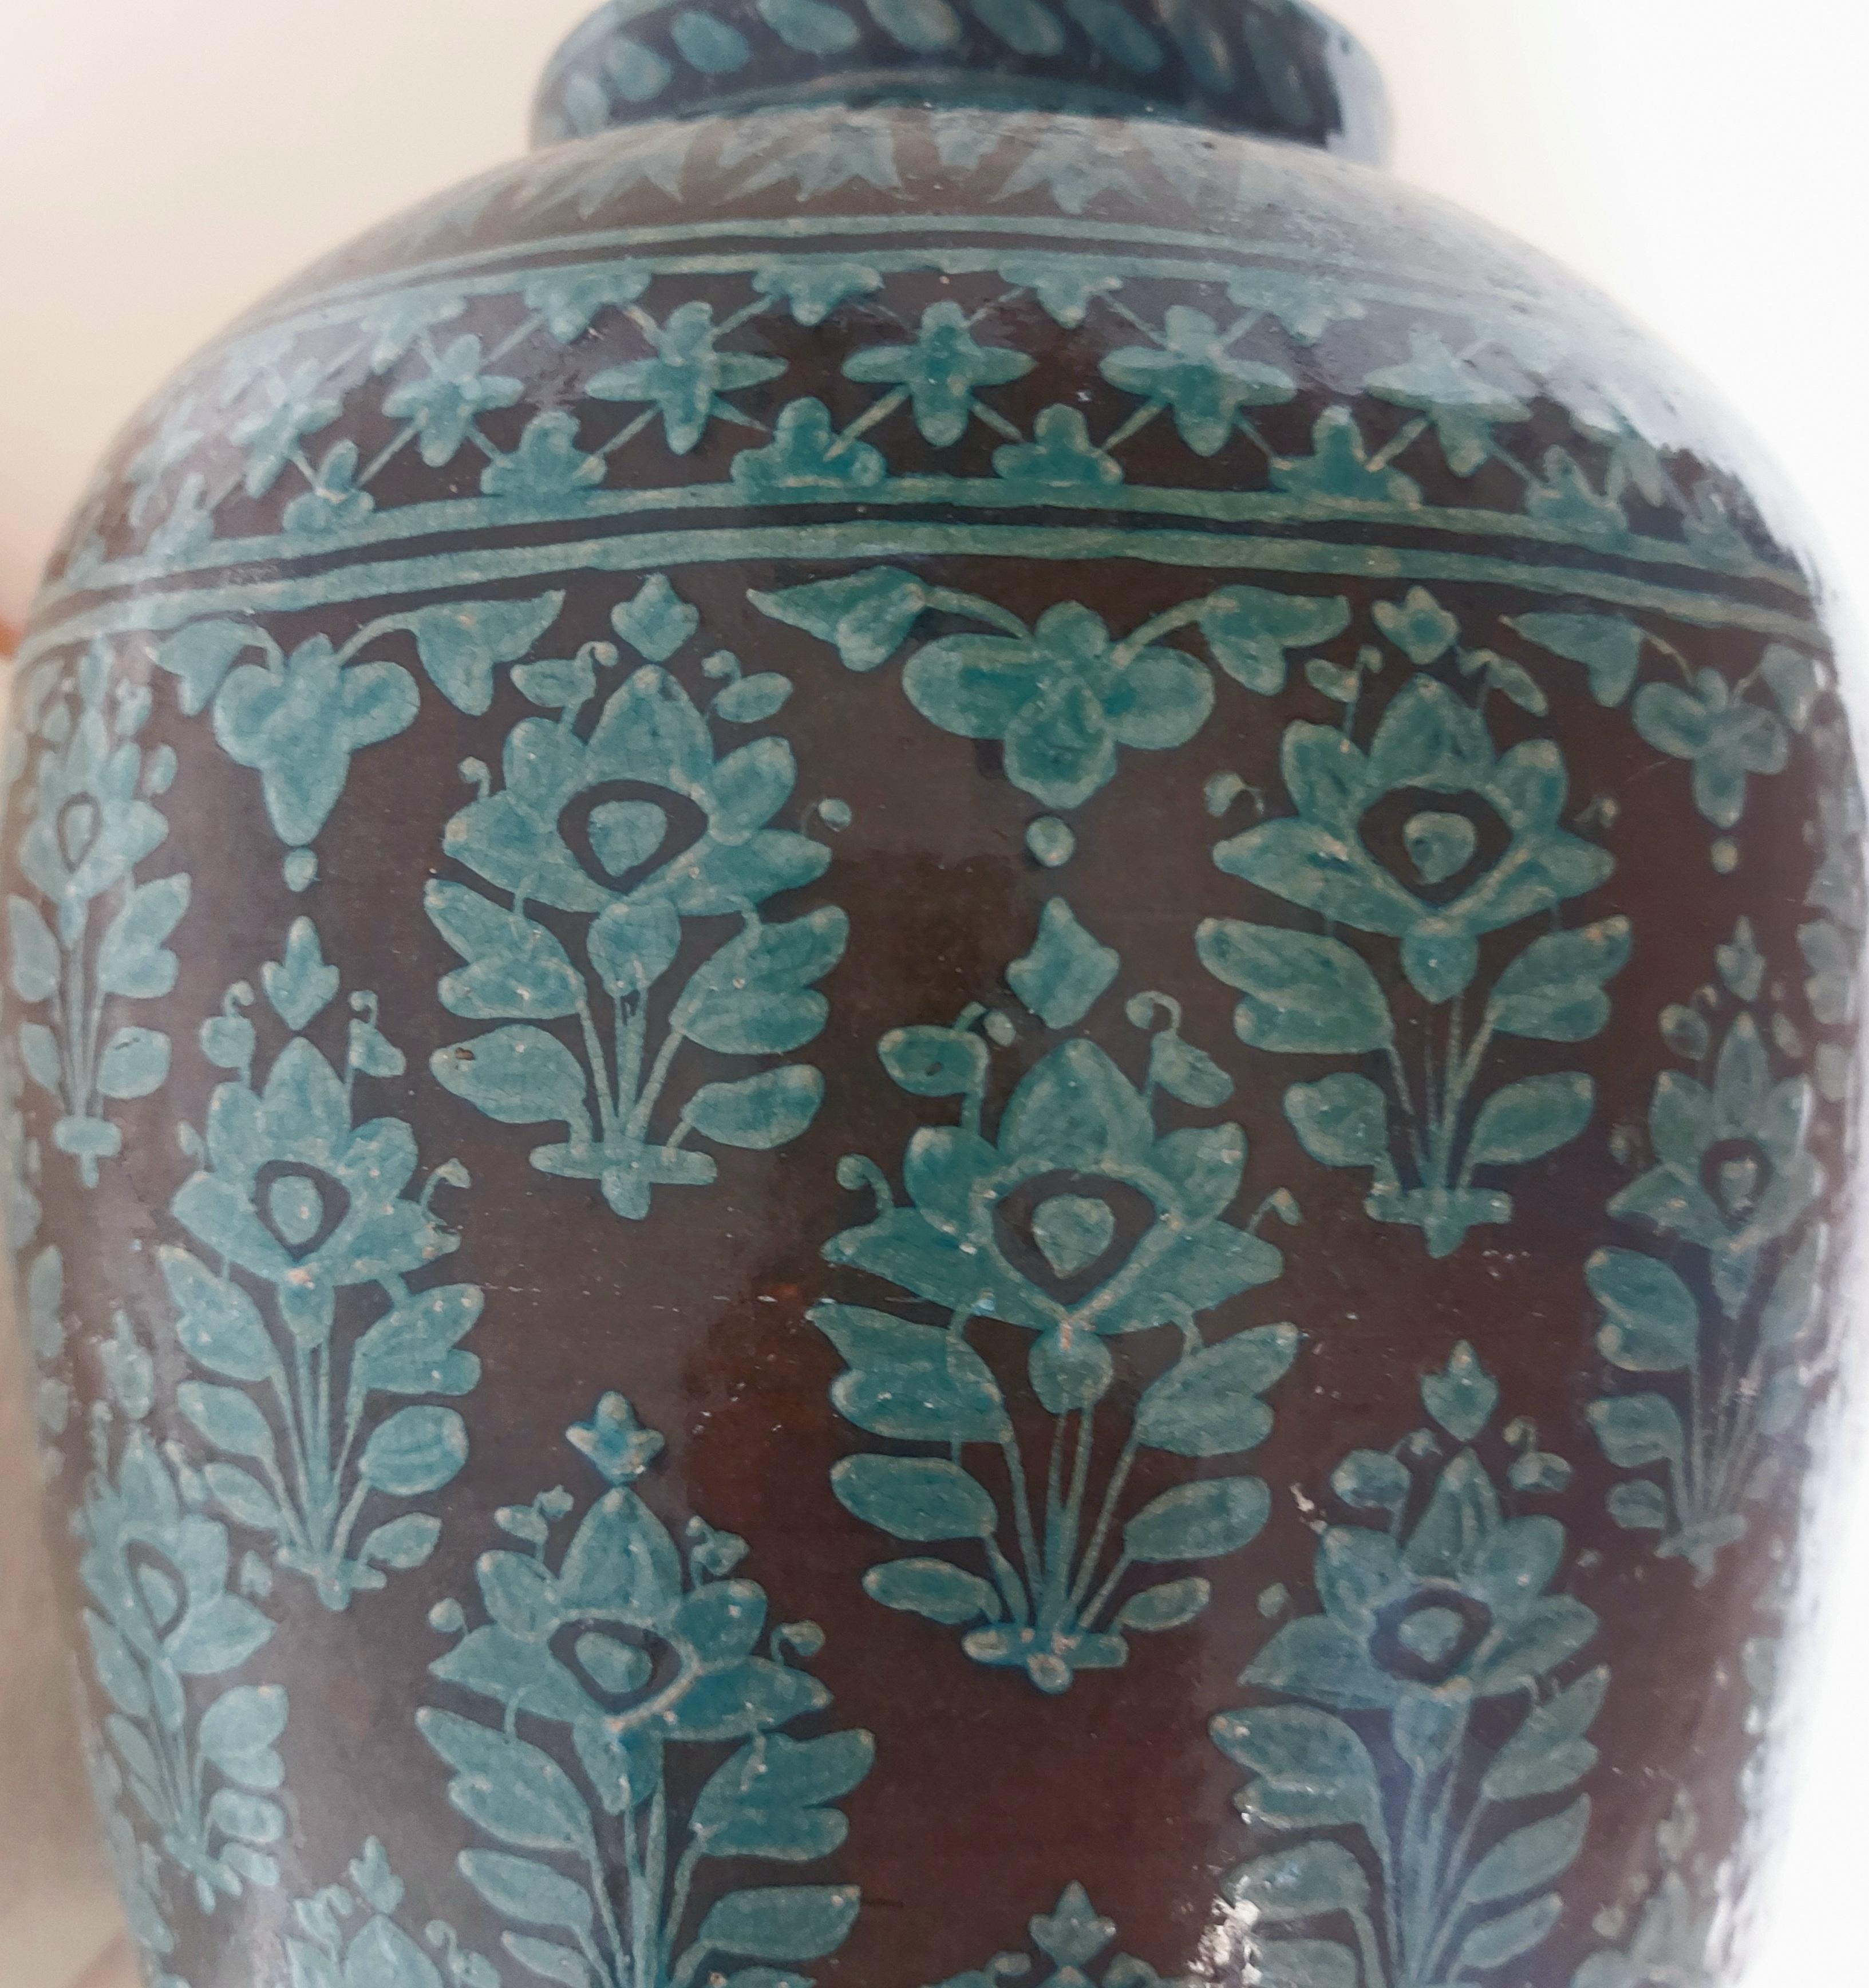 A fabulous and rare 19th century Indian Bombay Pottery School of Art turquoise pot with the iconic floral motif, still in use in Indian design today. Elegant in its simplicity. Stamped with the Rare ' School of Art Pottery Bombay' mark to the